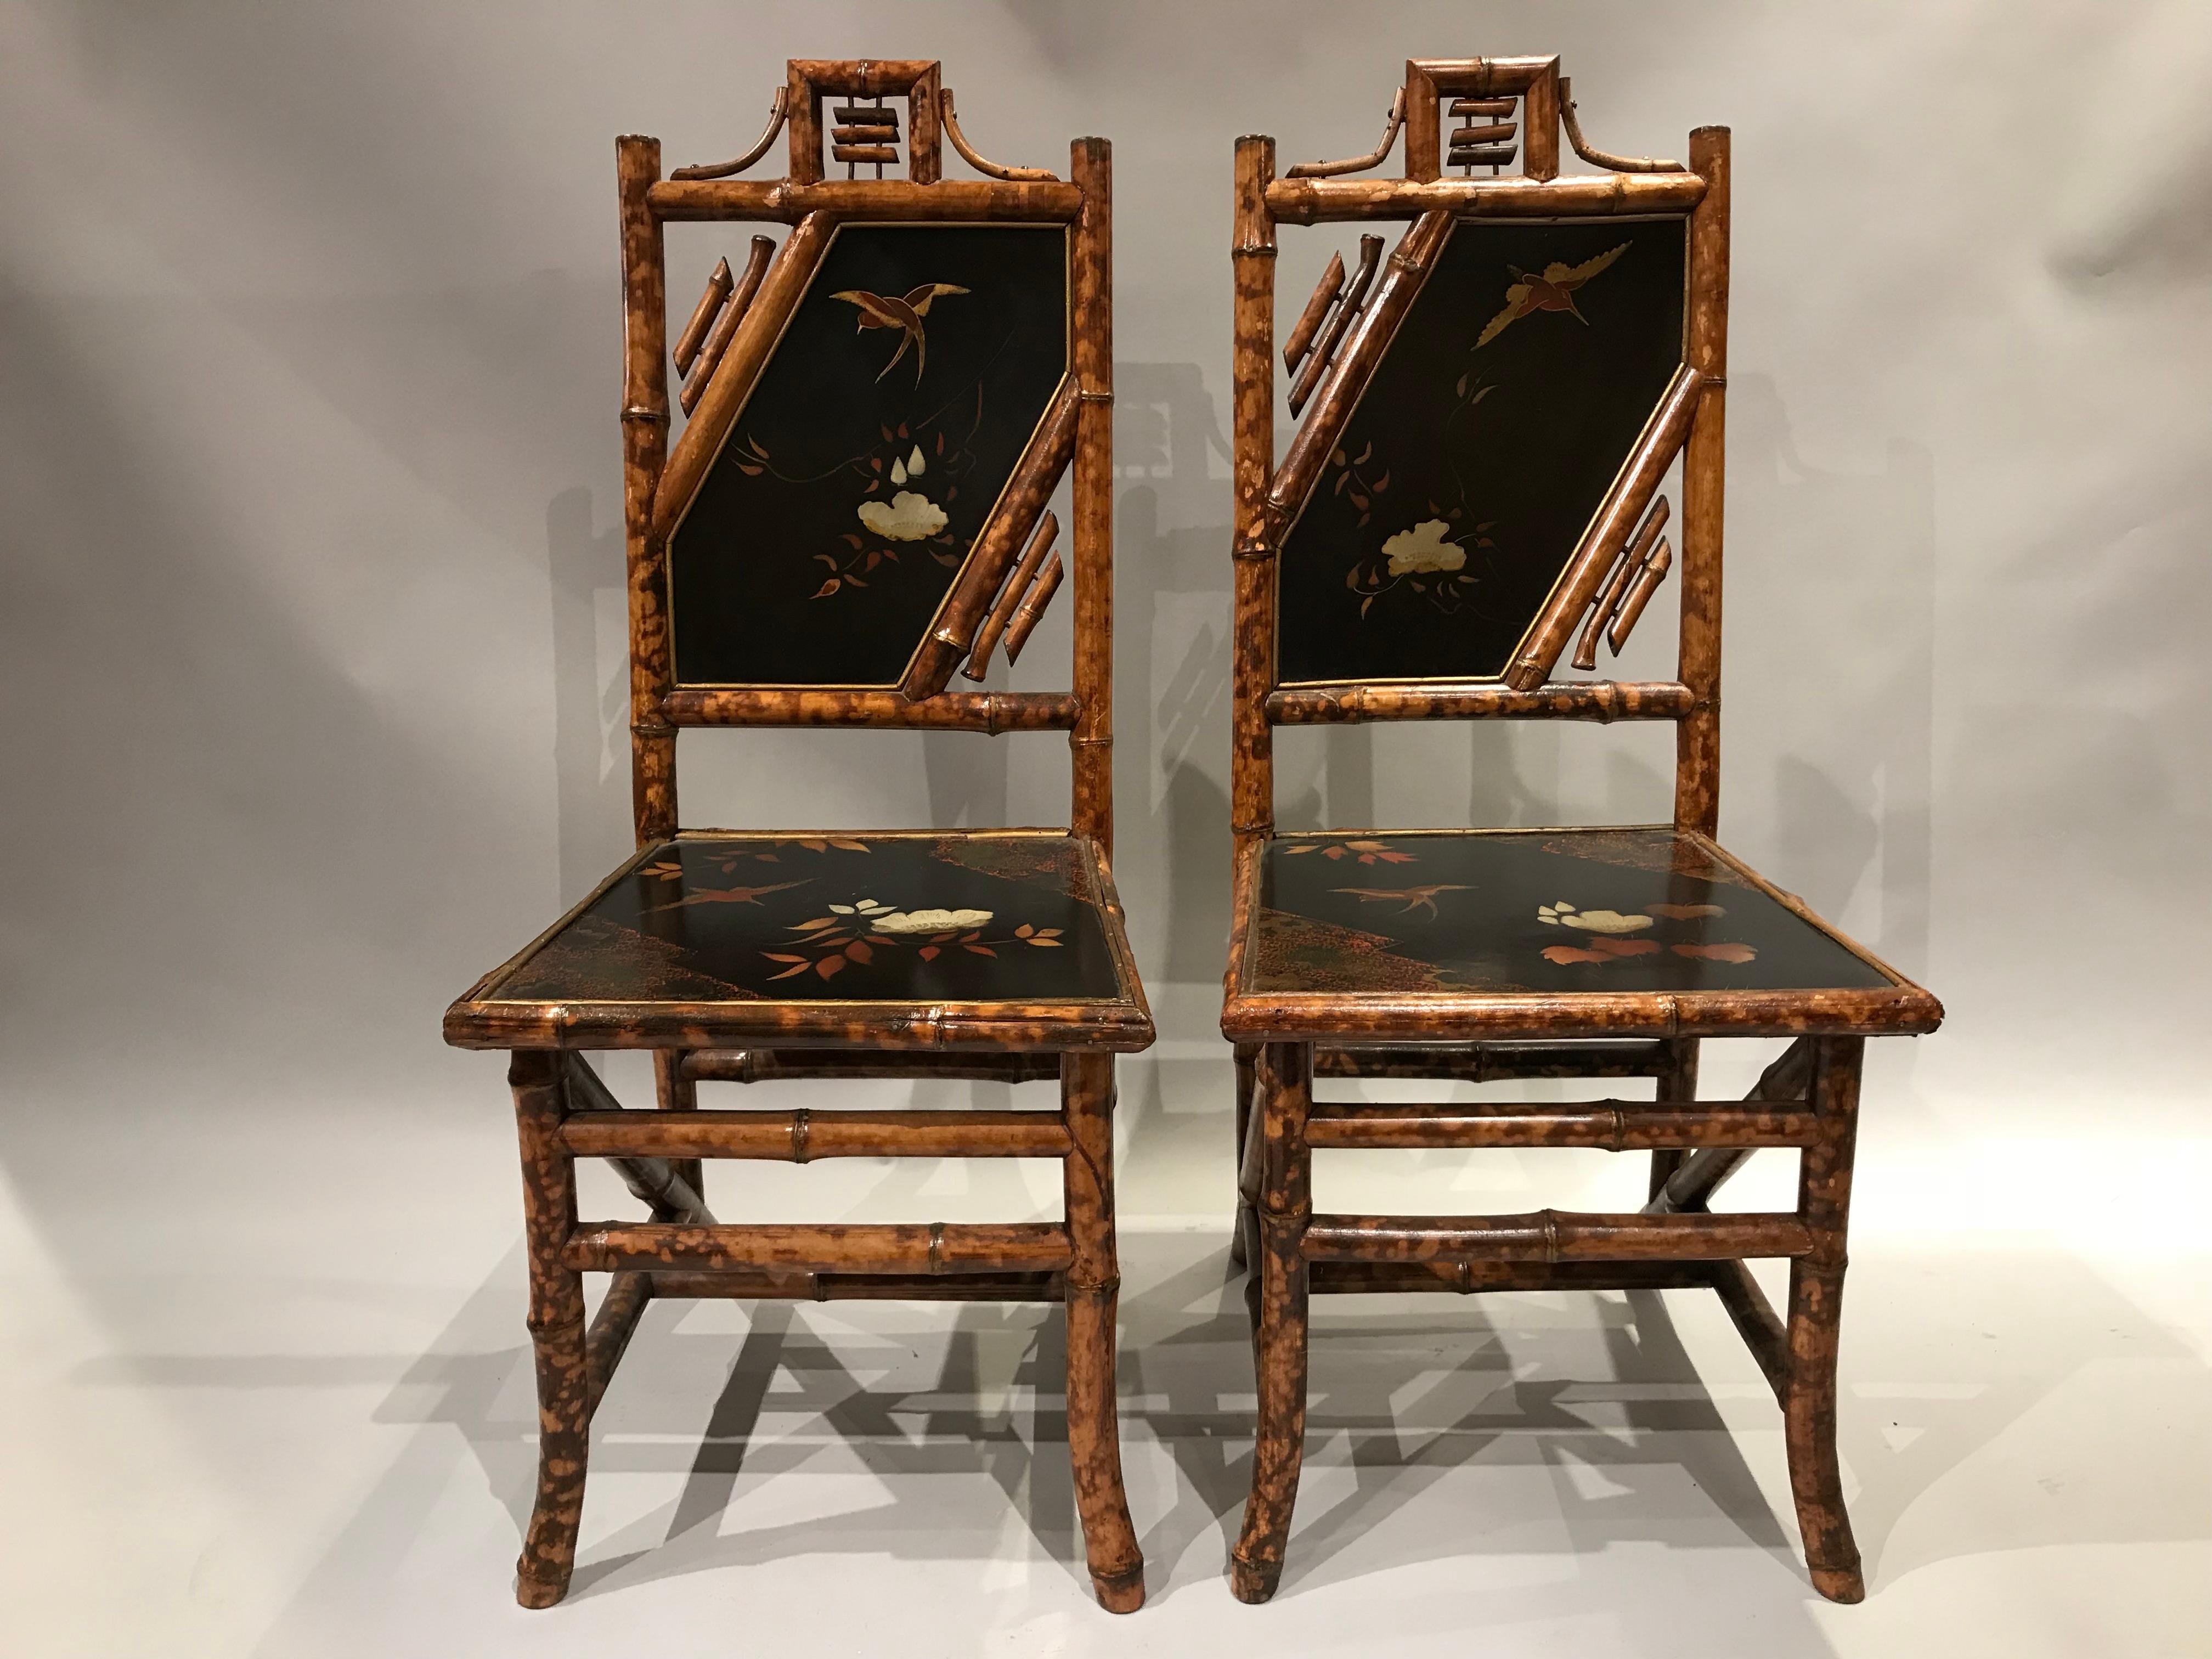 A fine pair of English bamboo side chairs with lacquered bird and foliate decorated seats and back panels, in very good condition, with minor imperfections and light expected wear from age and use. Dimensions: Each measure 39.5 in H x 16.5 in W x 19